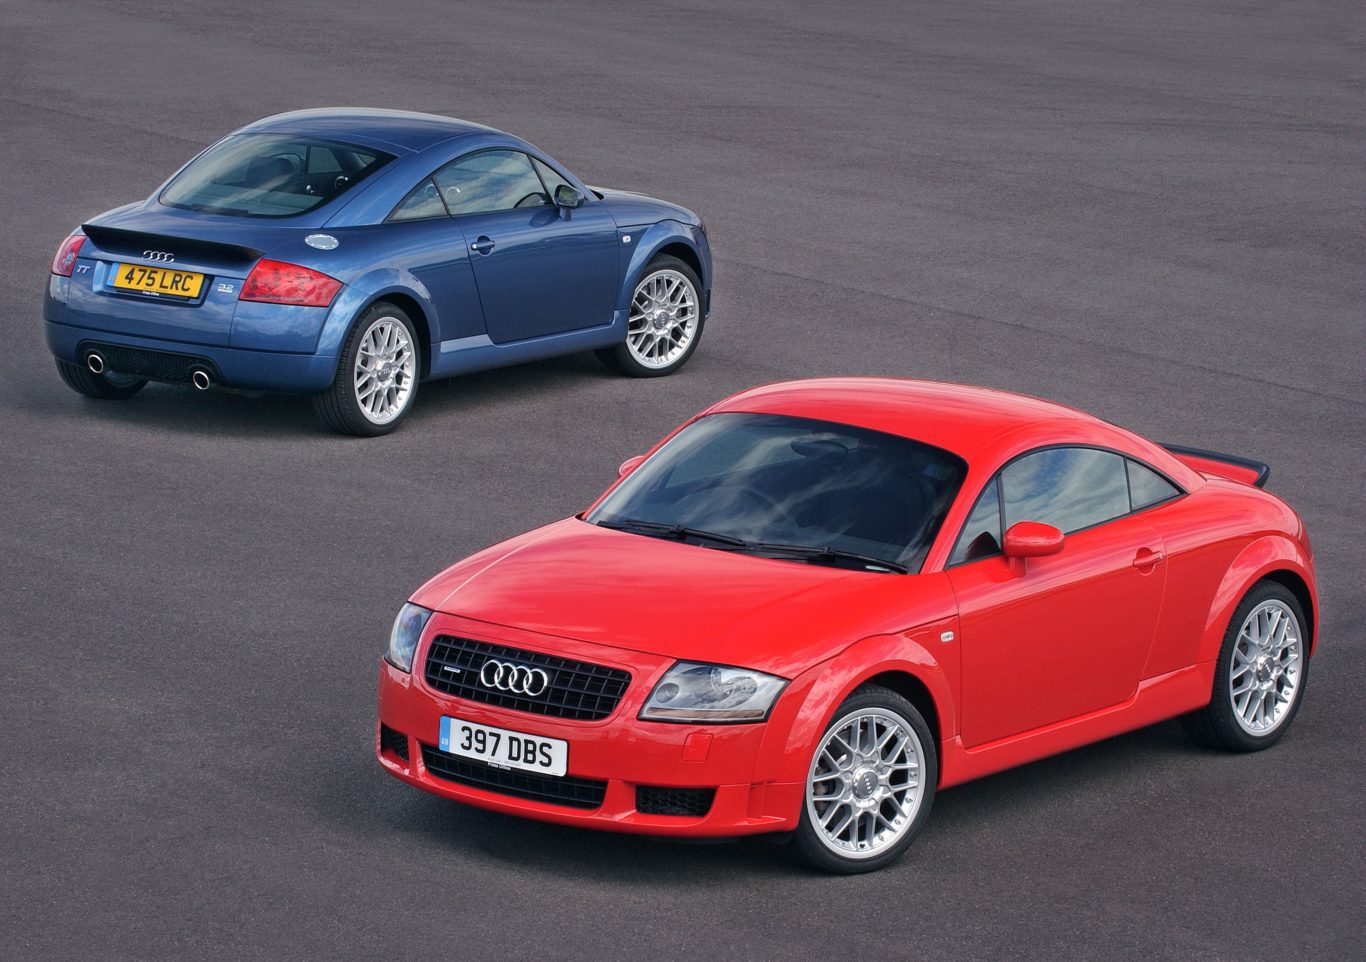 The Audi TT broke the mould in terms of styling